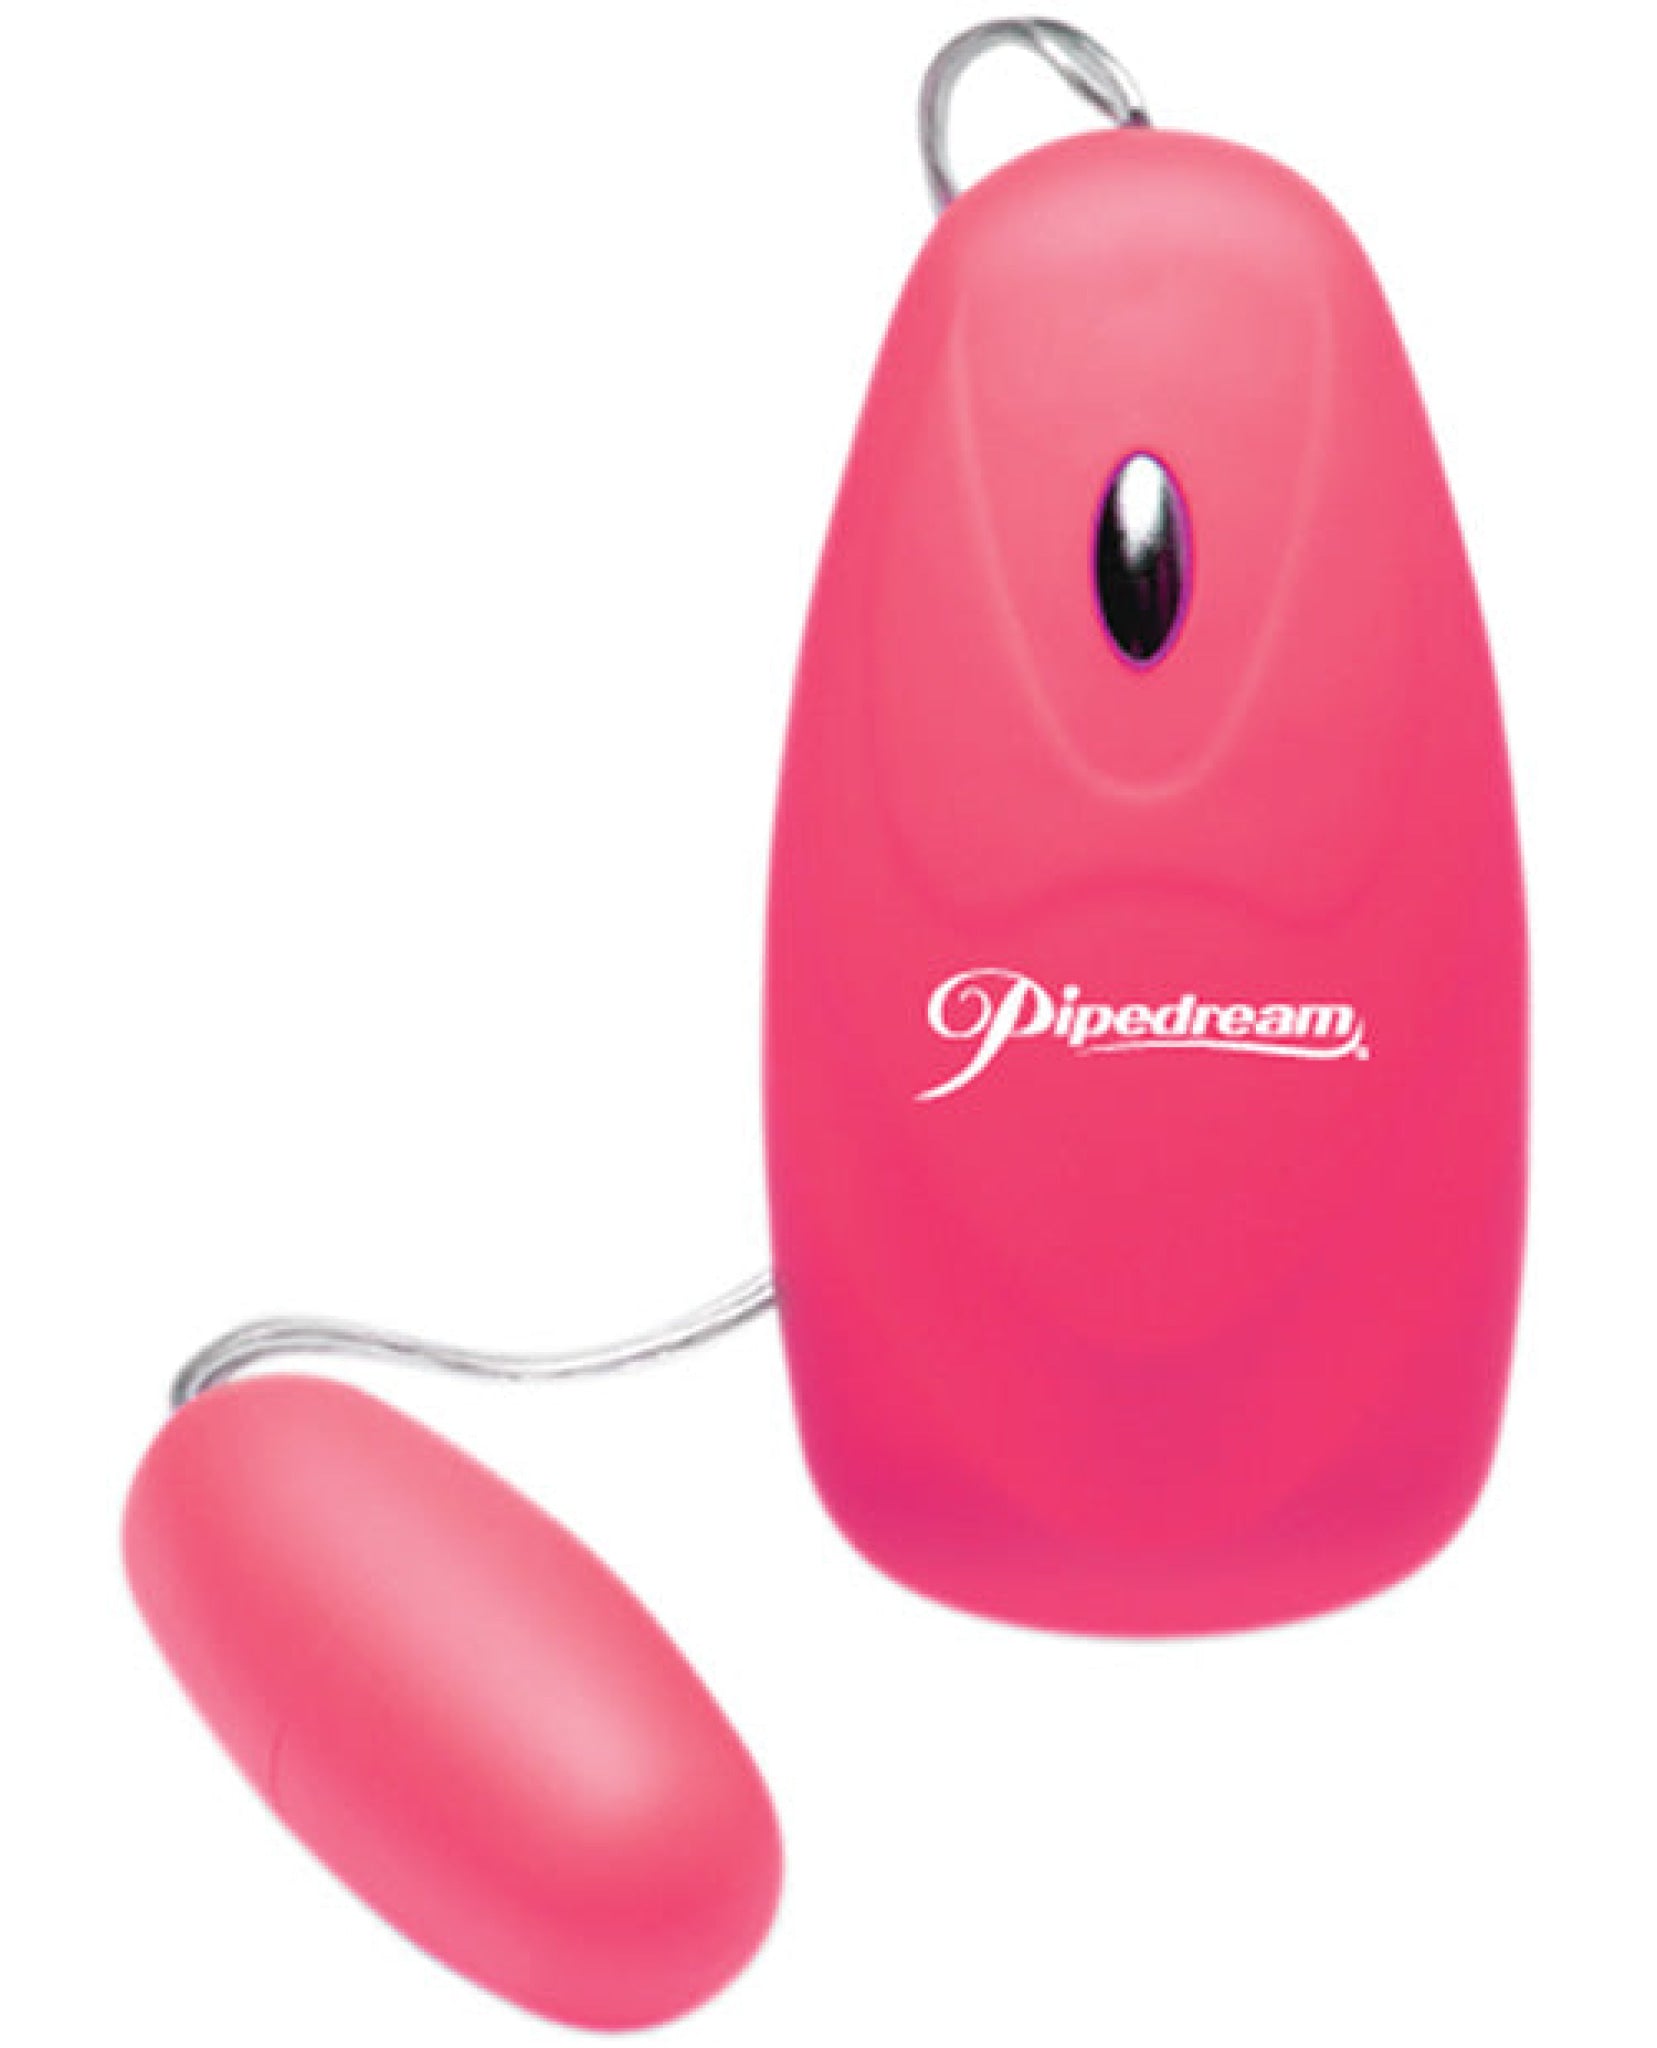 Neon Luv Touch Bullet - 5 Function Pipedream®